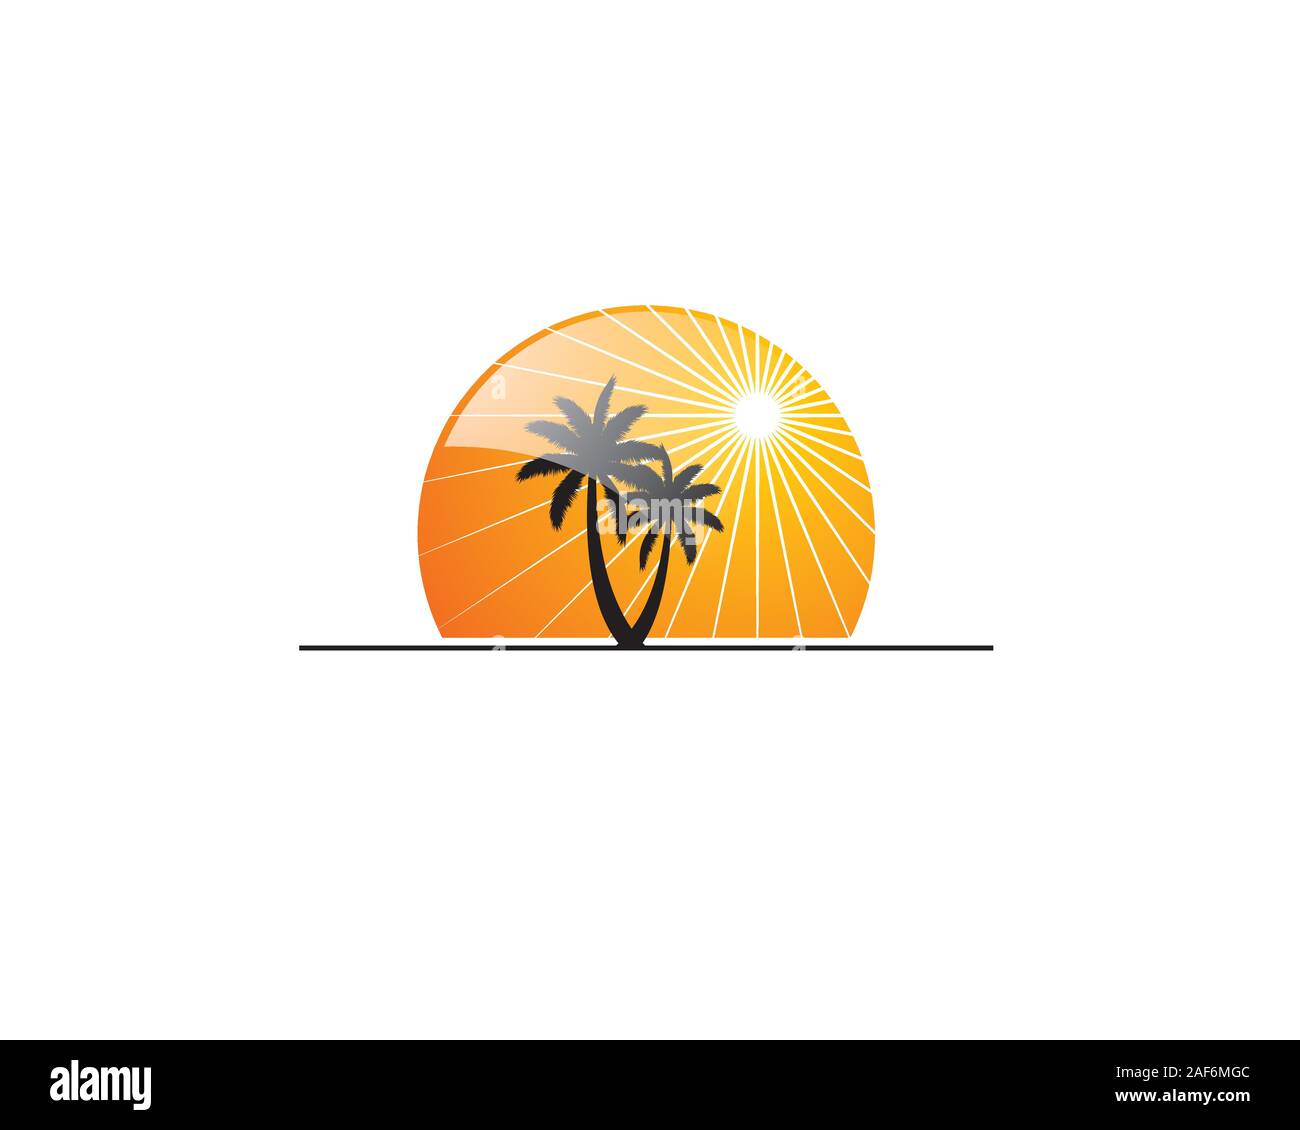 Sunset palm trees Stock Vector Images - Alamy